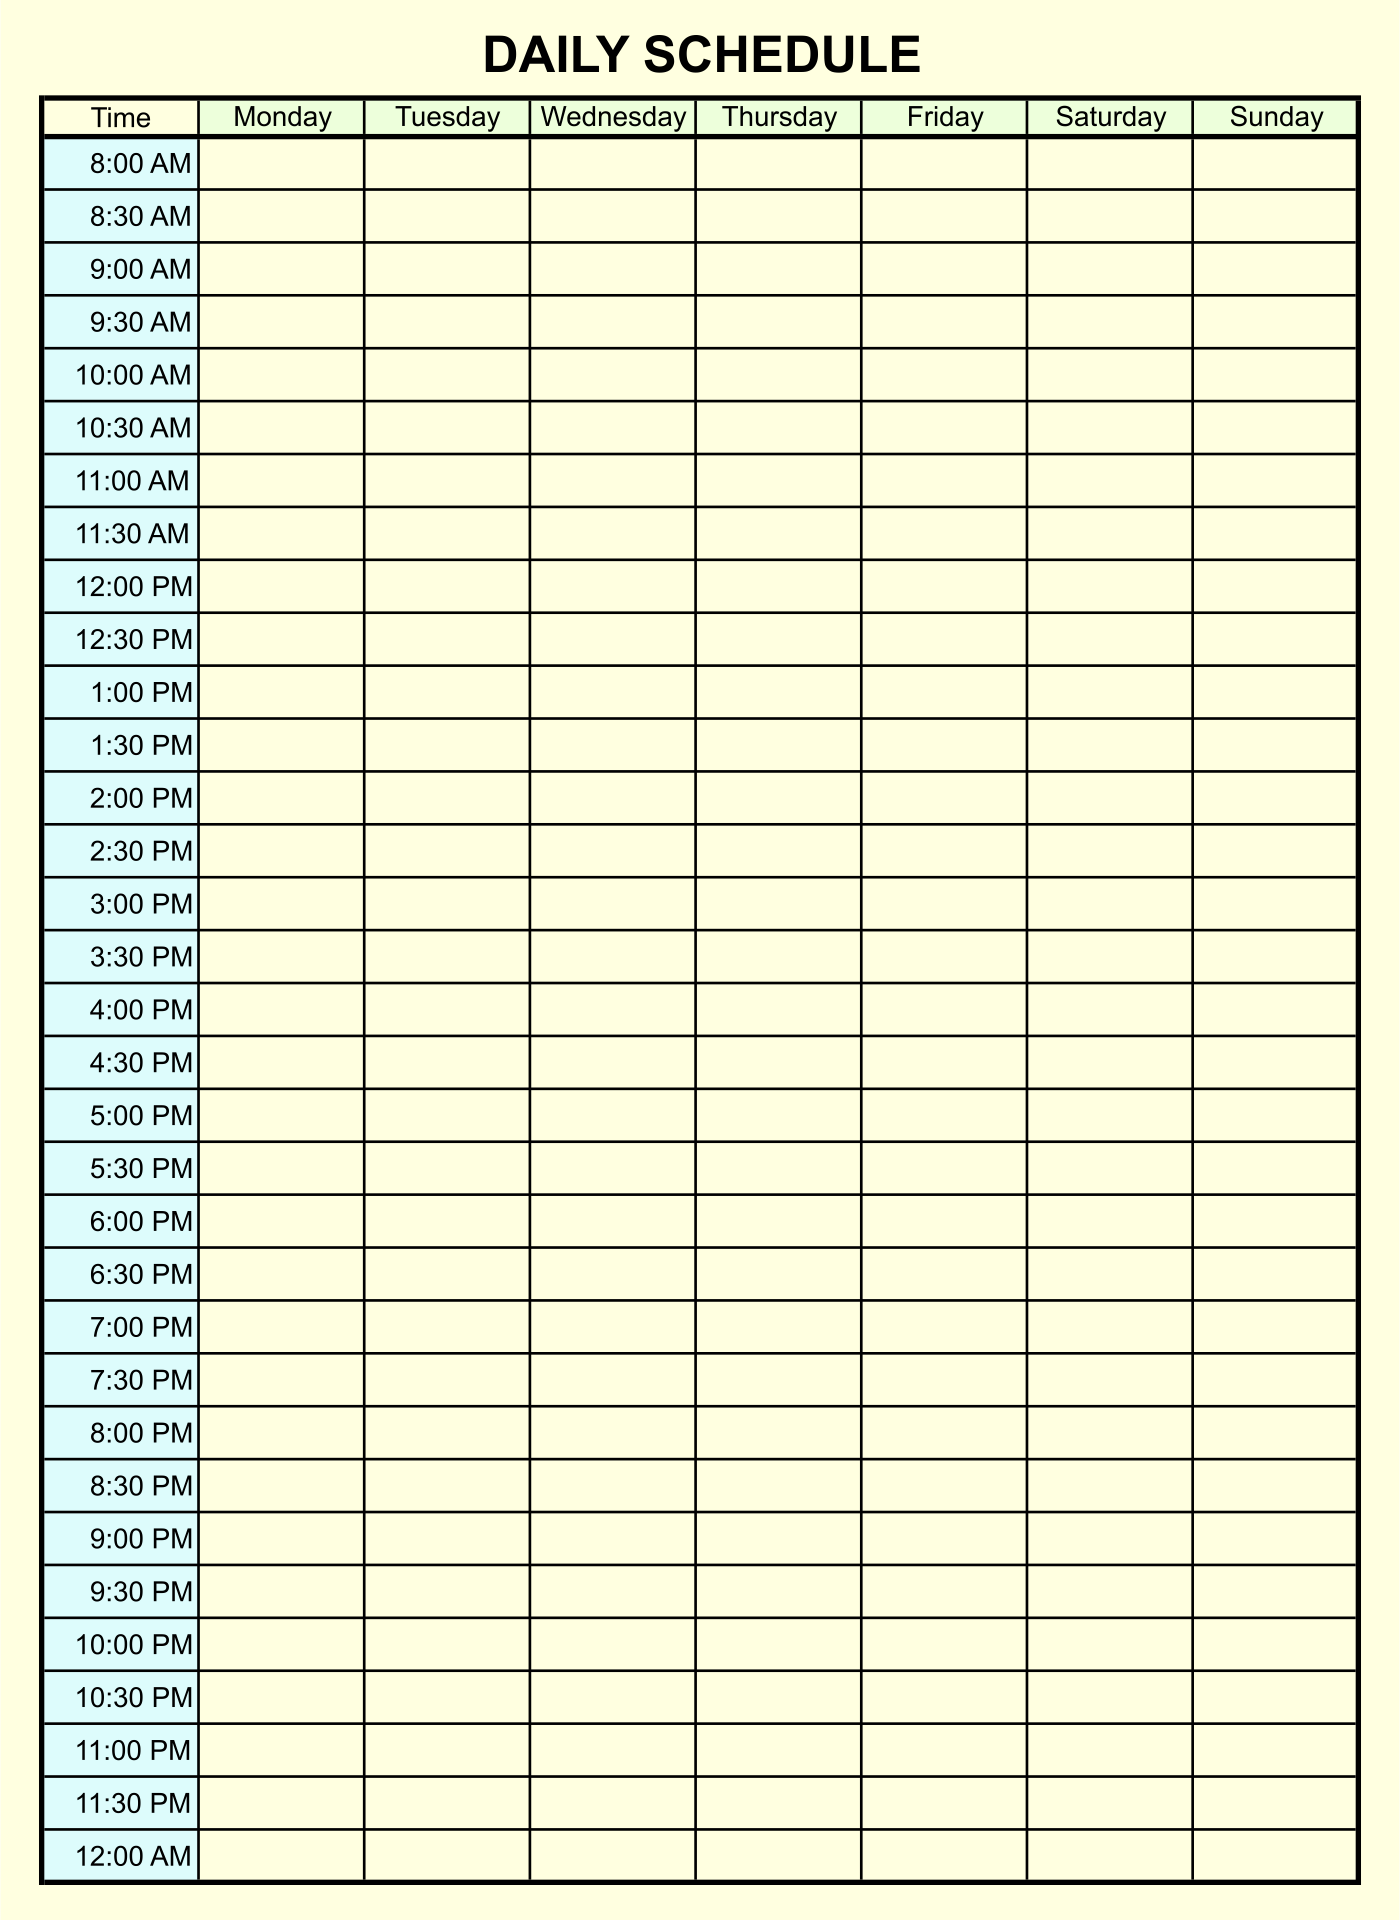 24 Hour Daily Schedule Template Schedule Template Daily Schedule